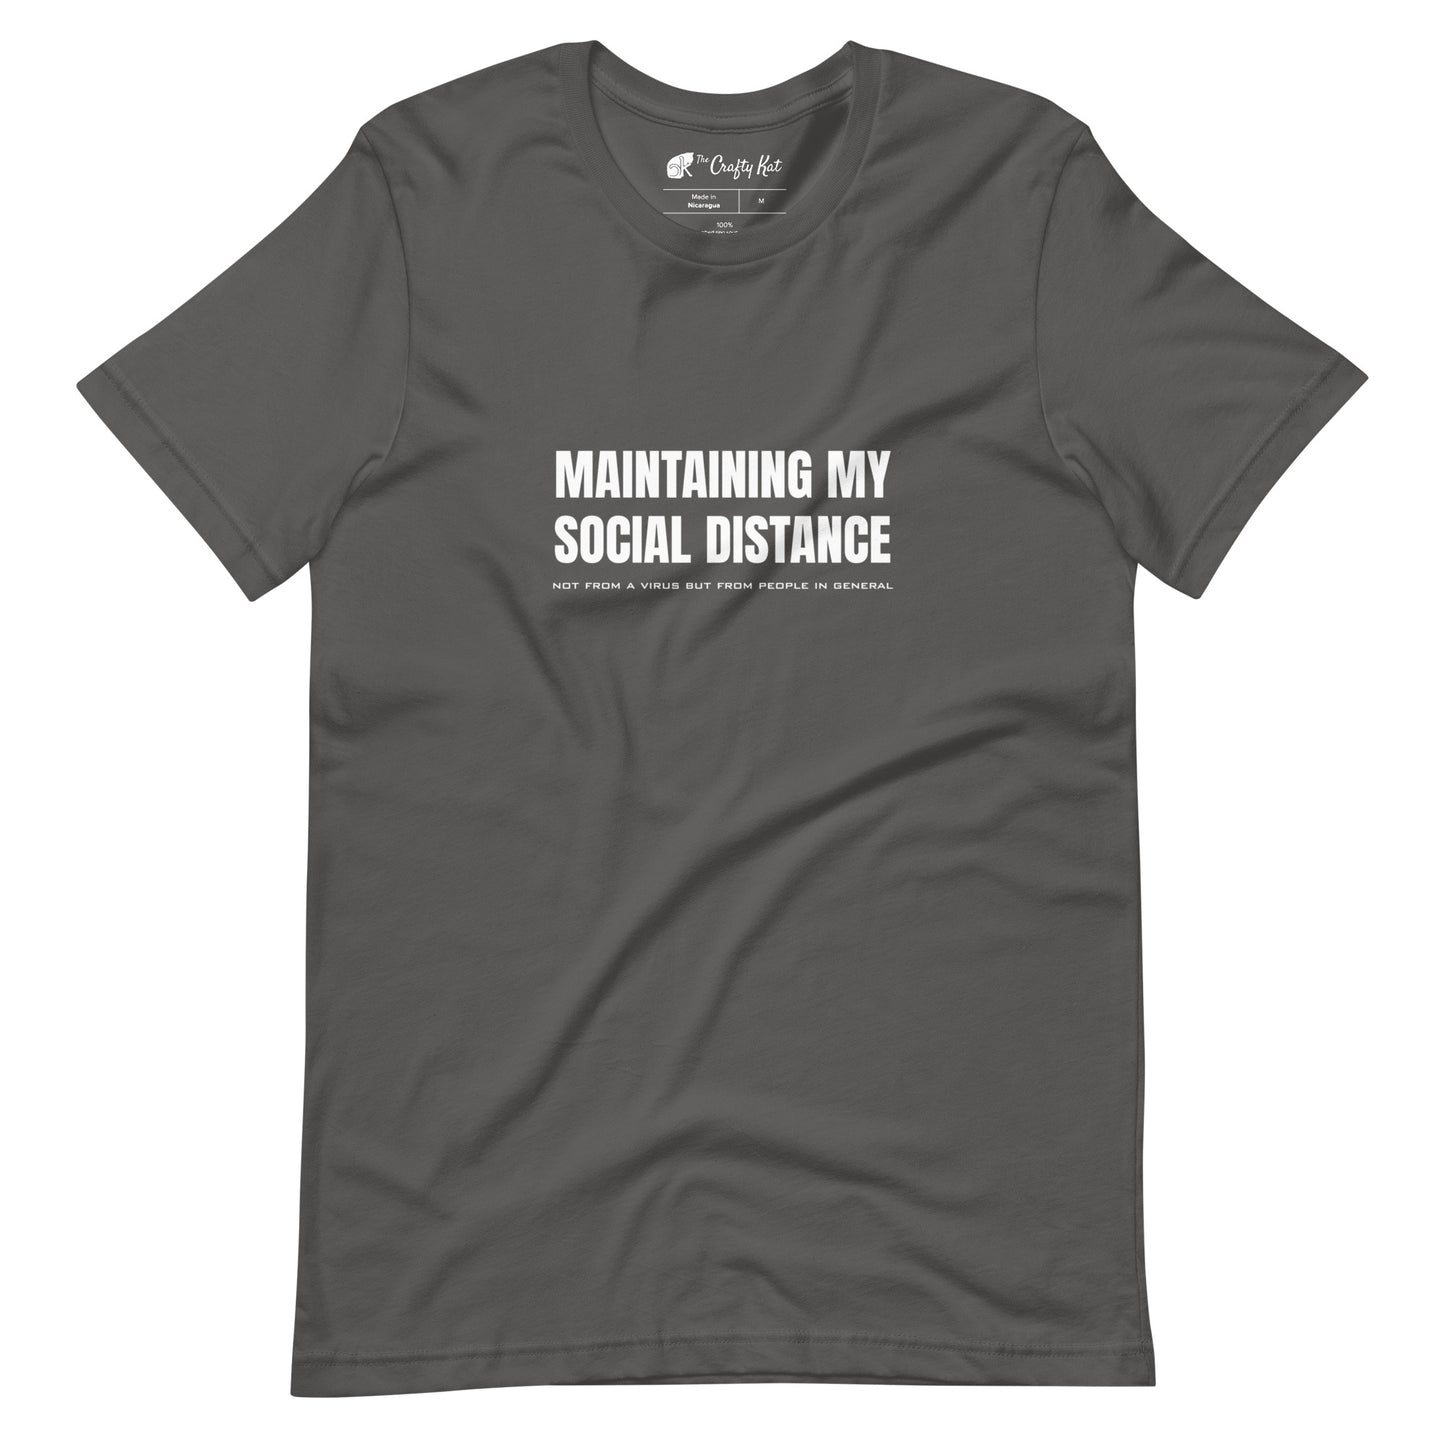 Asphalt grey t-shirt with white graphic: "MAINTAINING MY SOCIAL DISTANCE not from a virus but from people in general"